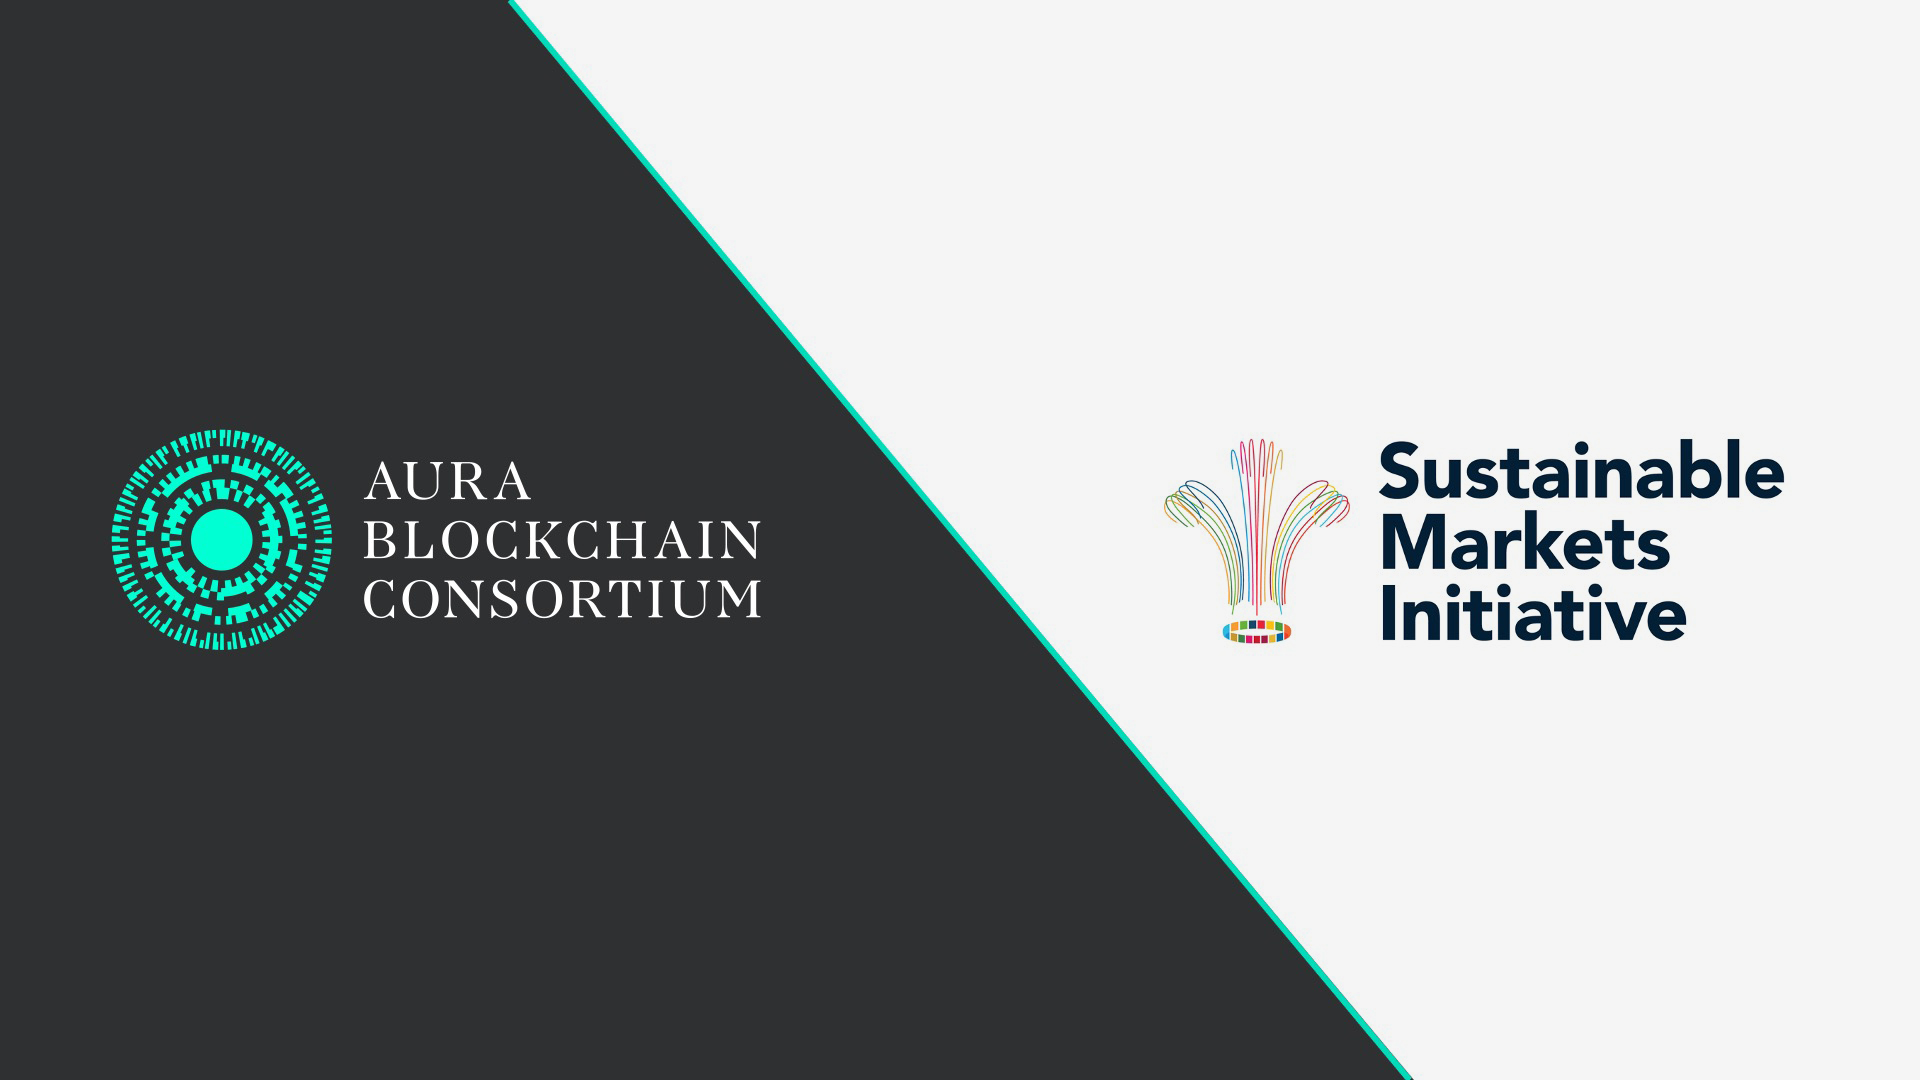 Aura Blockchain Consortium is joining HRH The Prince of Wales’ Sustainable Markets Initiative Fashion Task Force